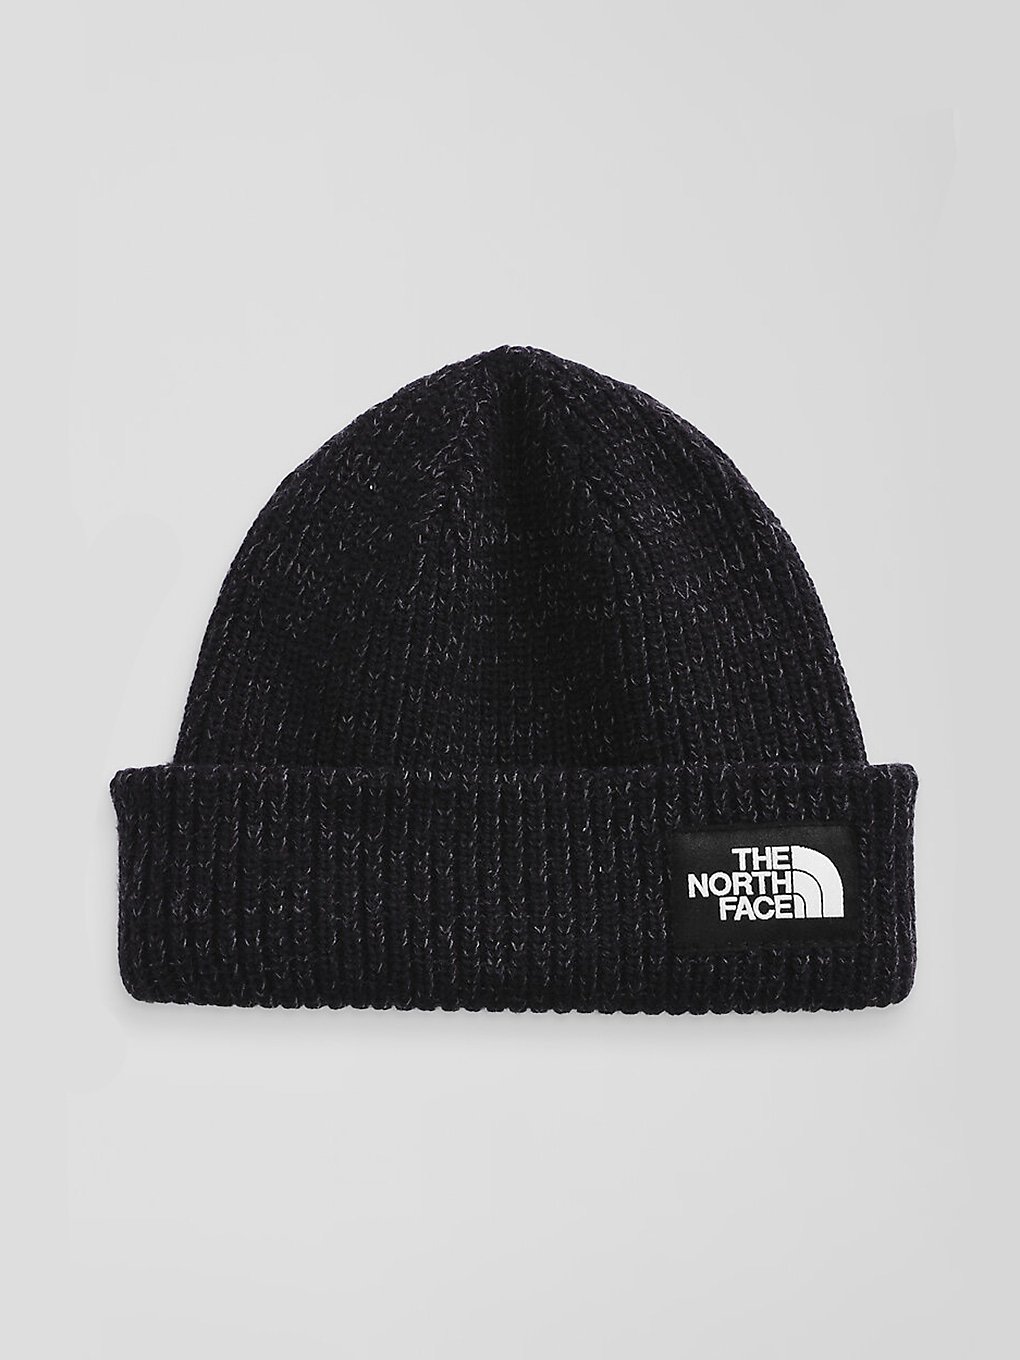 THE NORTH FACE Salty Dog Lined Beanie tnf black